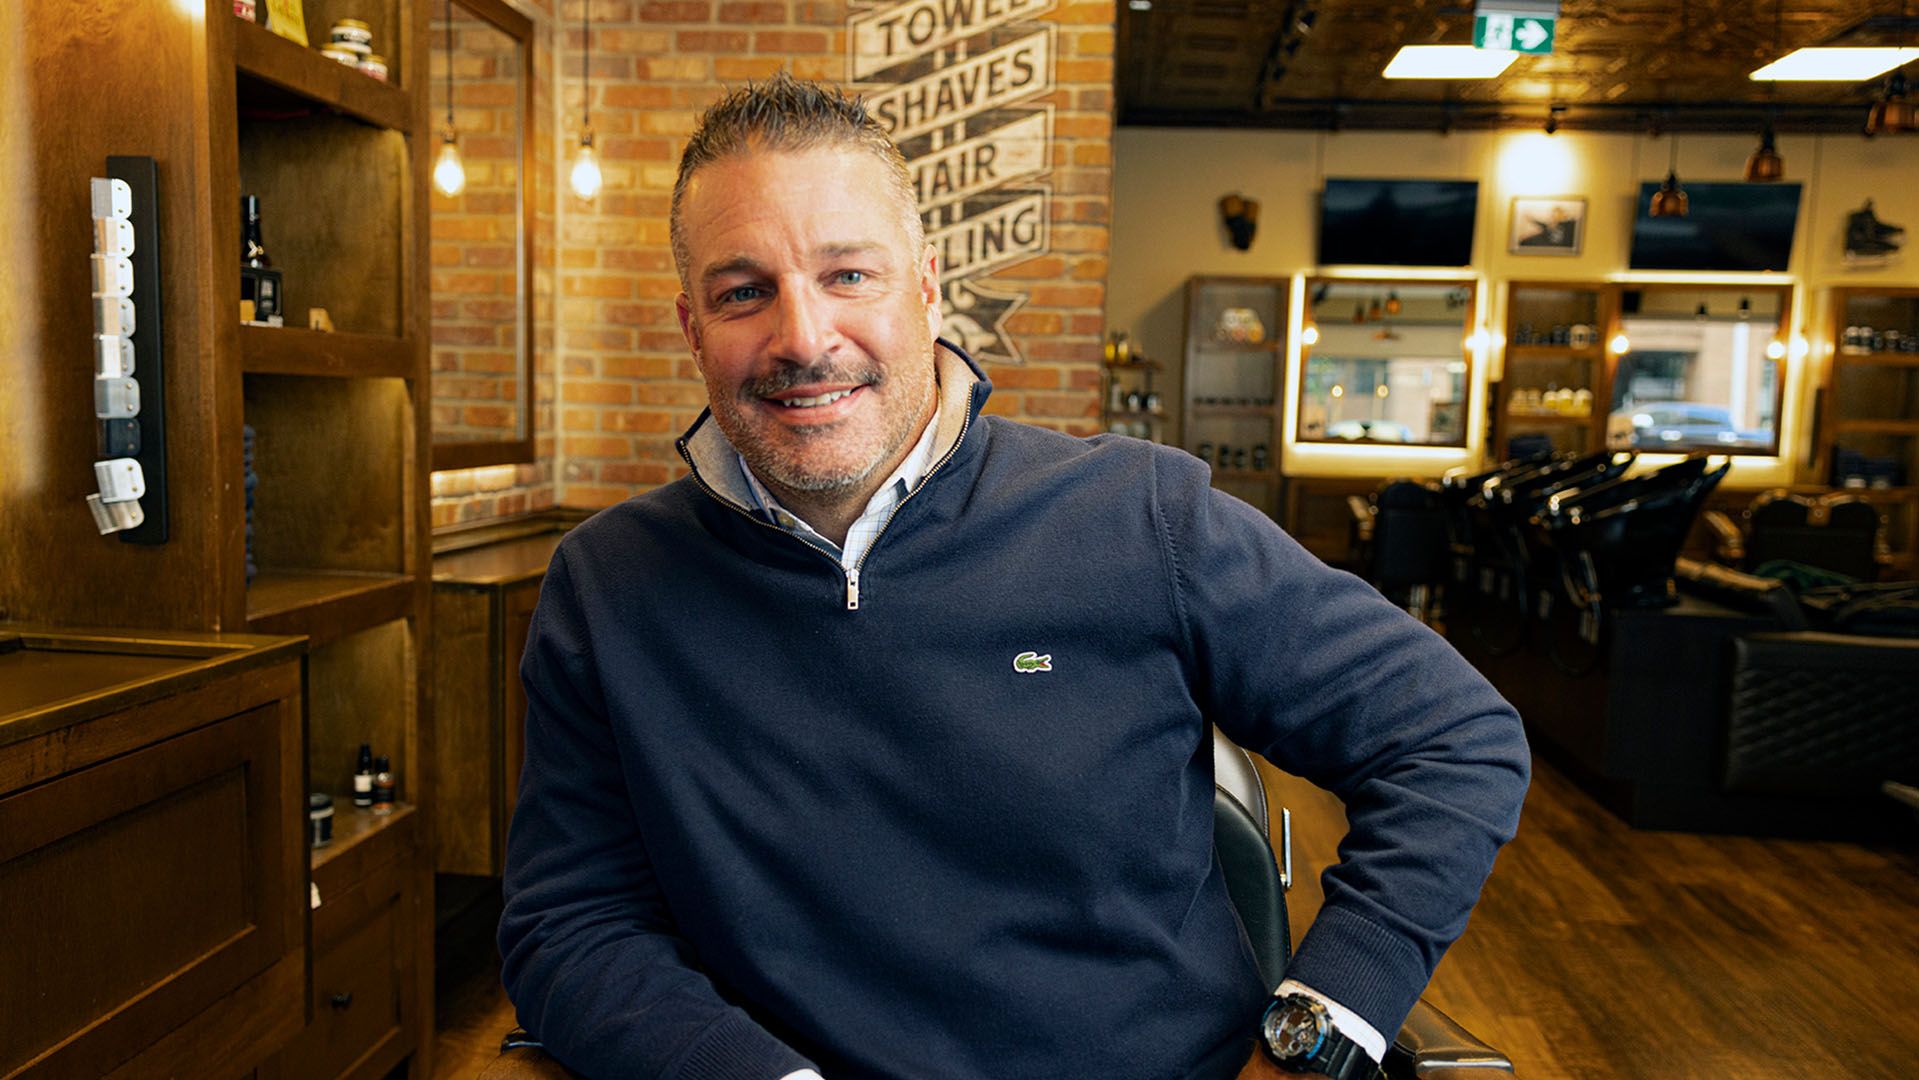 Movember supporter Greg Filipchuk from SECURE, seated in a barber shop and smiling to camera.